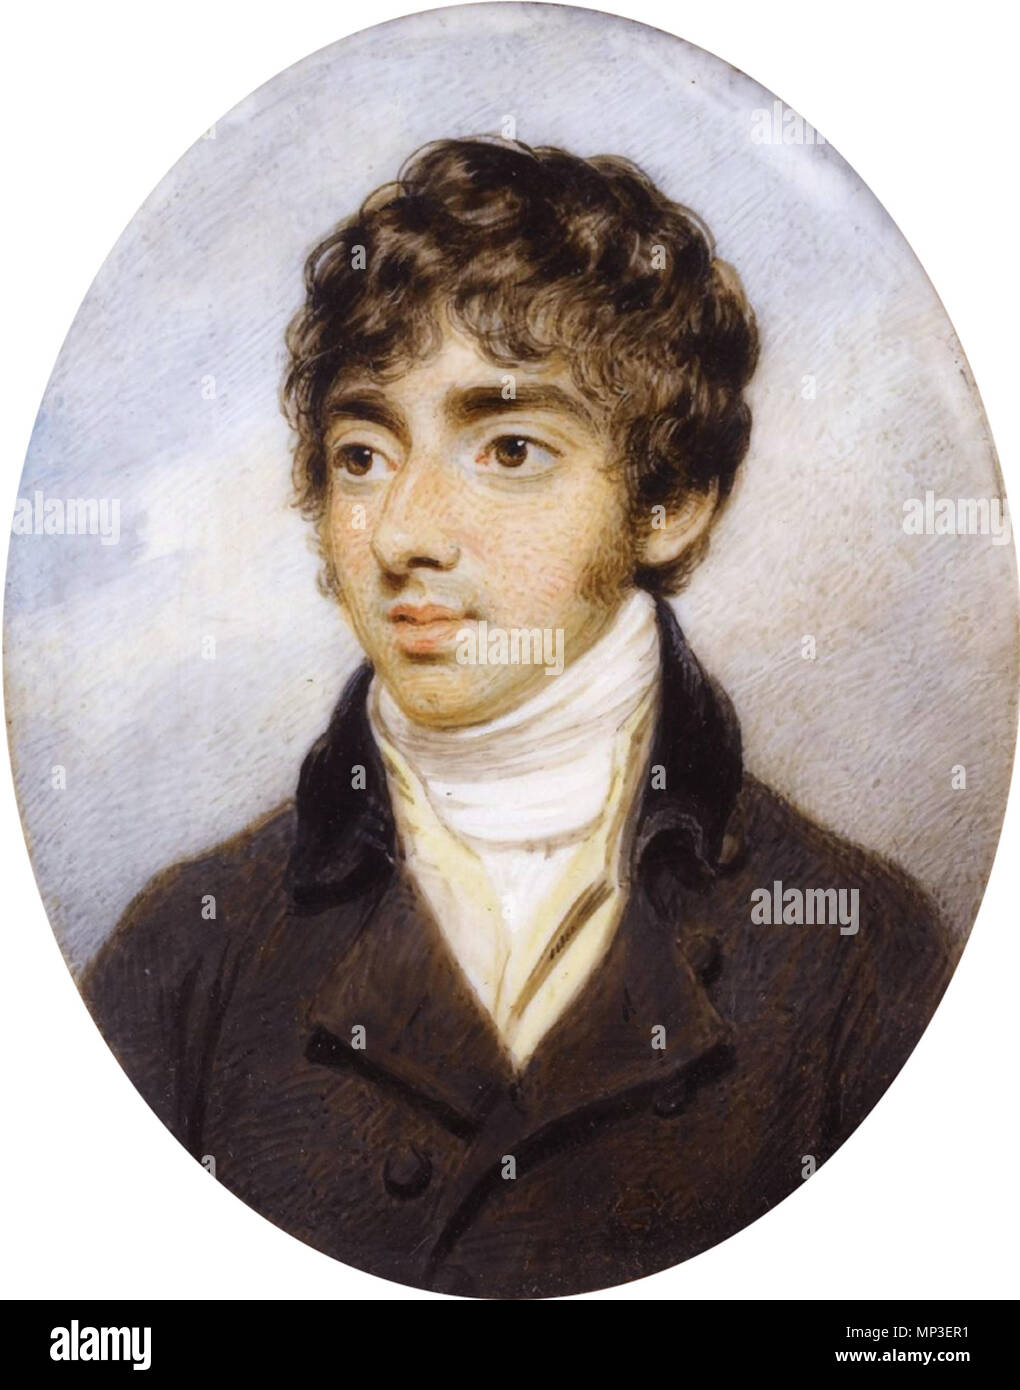 Thomas Girtin (1775-1802)    .  English: Thomas Girtin (1775-1802) 7.2 by 6.2 cm.; with short curled brown hair, wearing a brown coat with a black collar and a buff waistcoat, cloud and sky background later inscribed on a label (verso): Thomas Girtin / by / Henry Edridge ARA / inherited by Dr T C Girtin / given by him to his daughter / Mary (Barnard) / Left by her to her daughter / Ethel (Sutton). / Bought in 1935 by Sabina / wife of Thomas Girtin - / with lock of hair watercolour with touches of gum arabic on ivory  . 18/19th century.    Henry Edridge  (–1821)    Alternative names Edridge  De Stock Photo